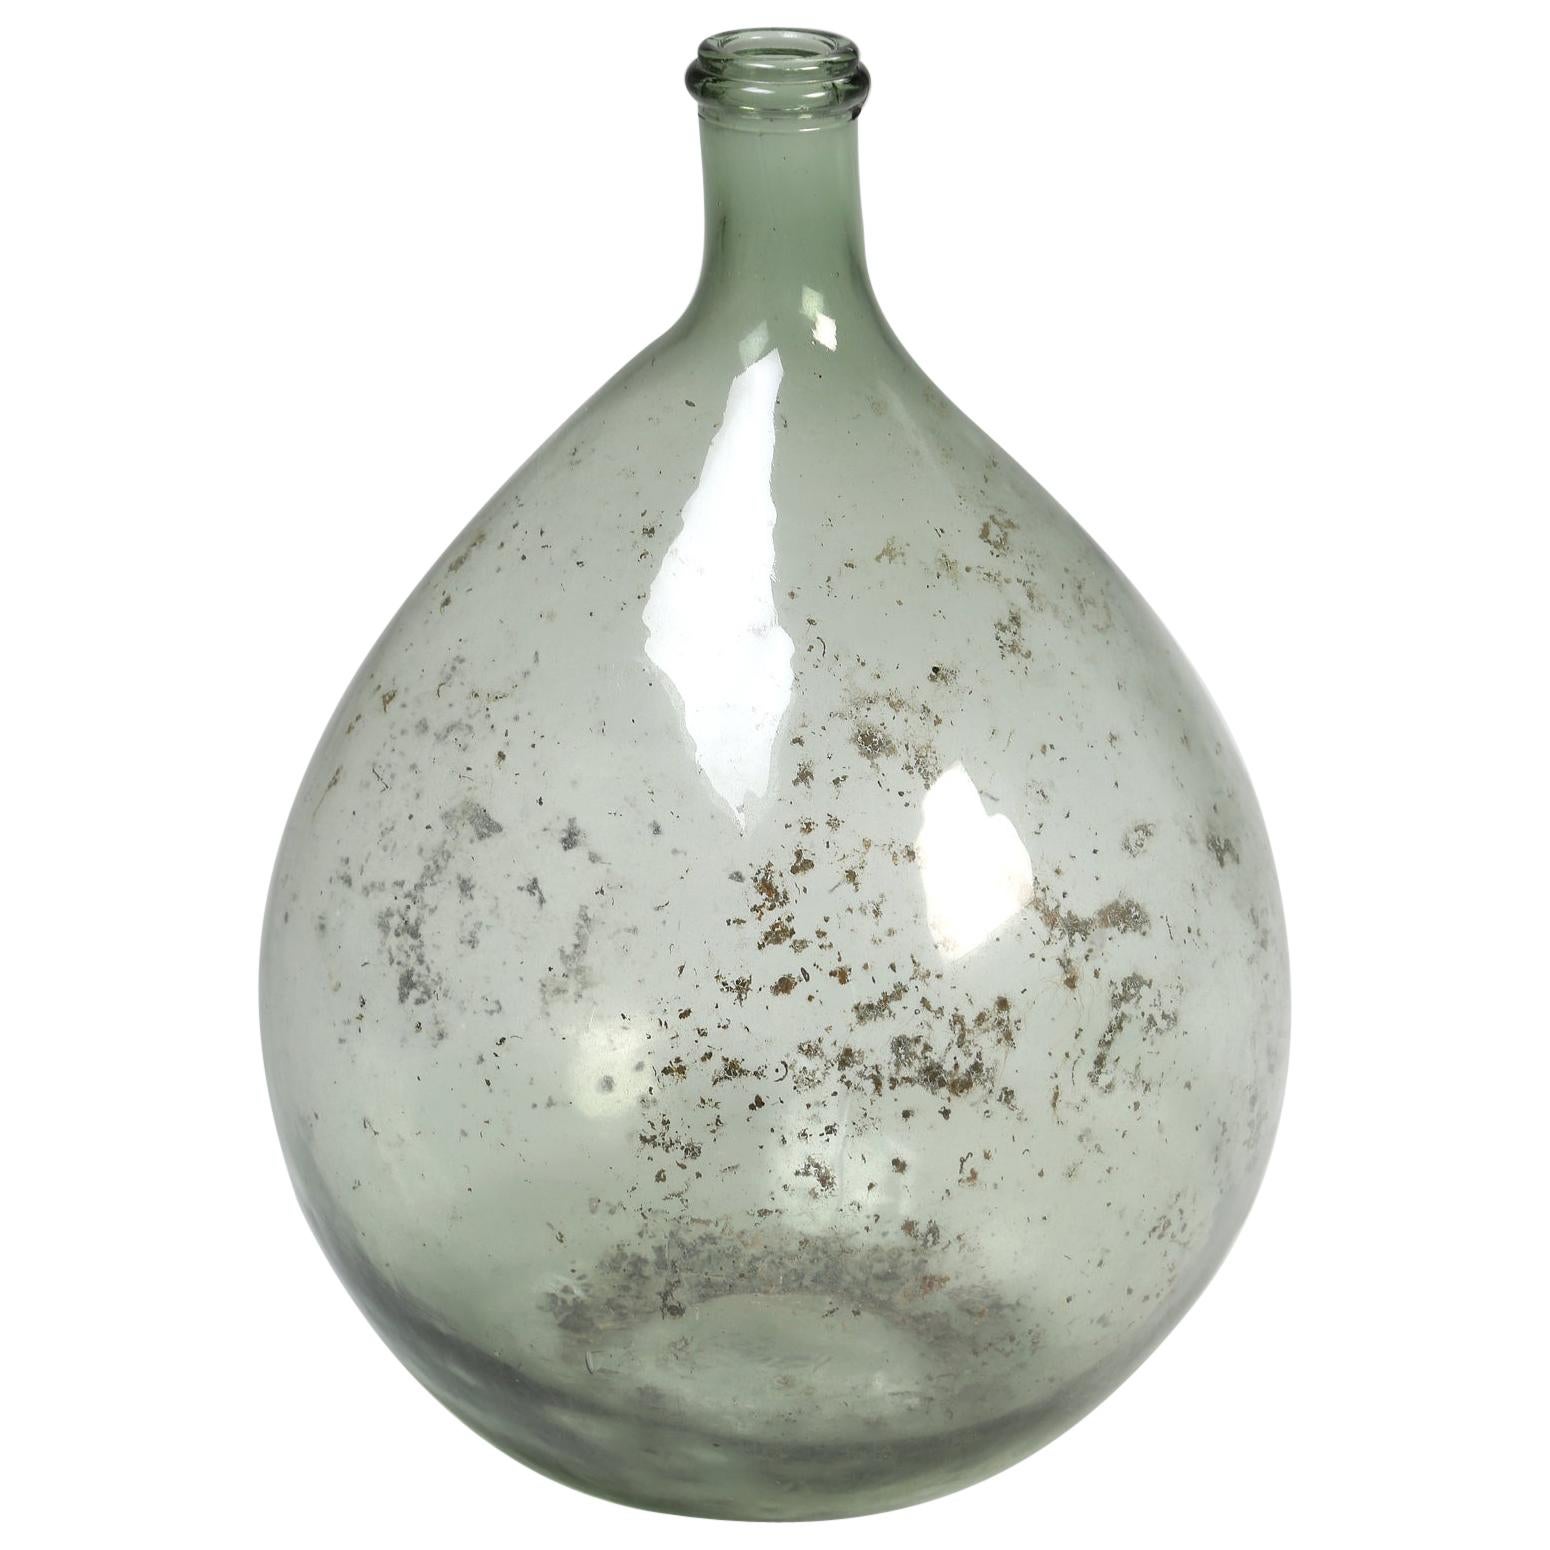 Antique French Large Glass Carboy or Demijohn, circa 1900